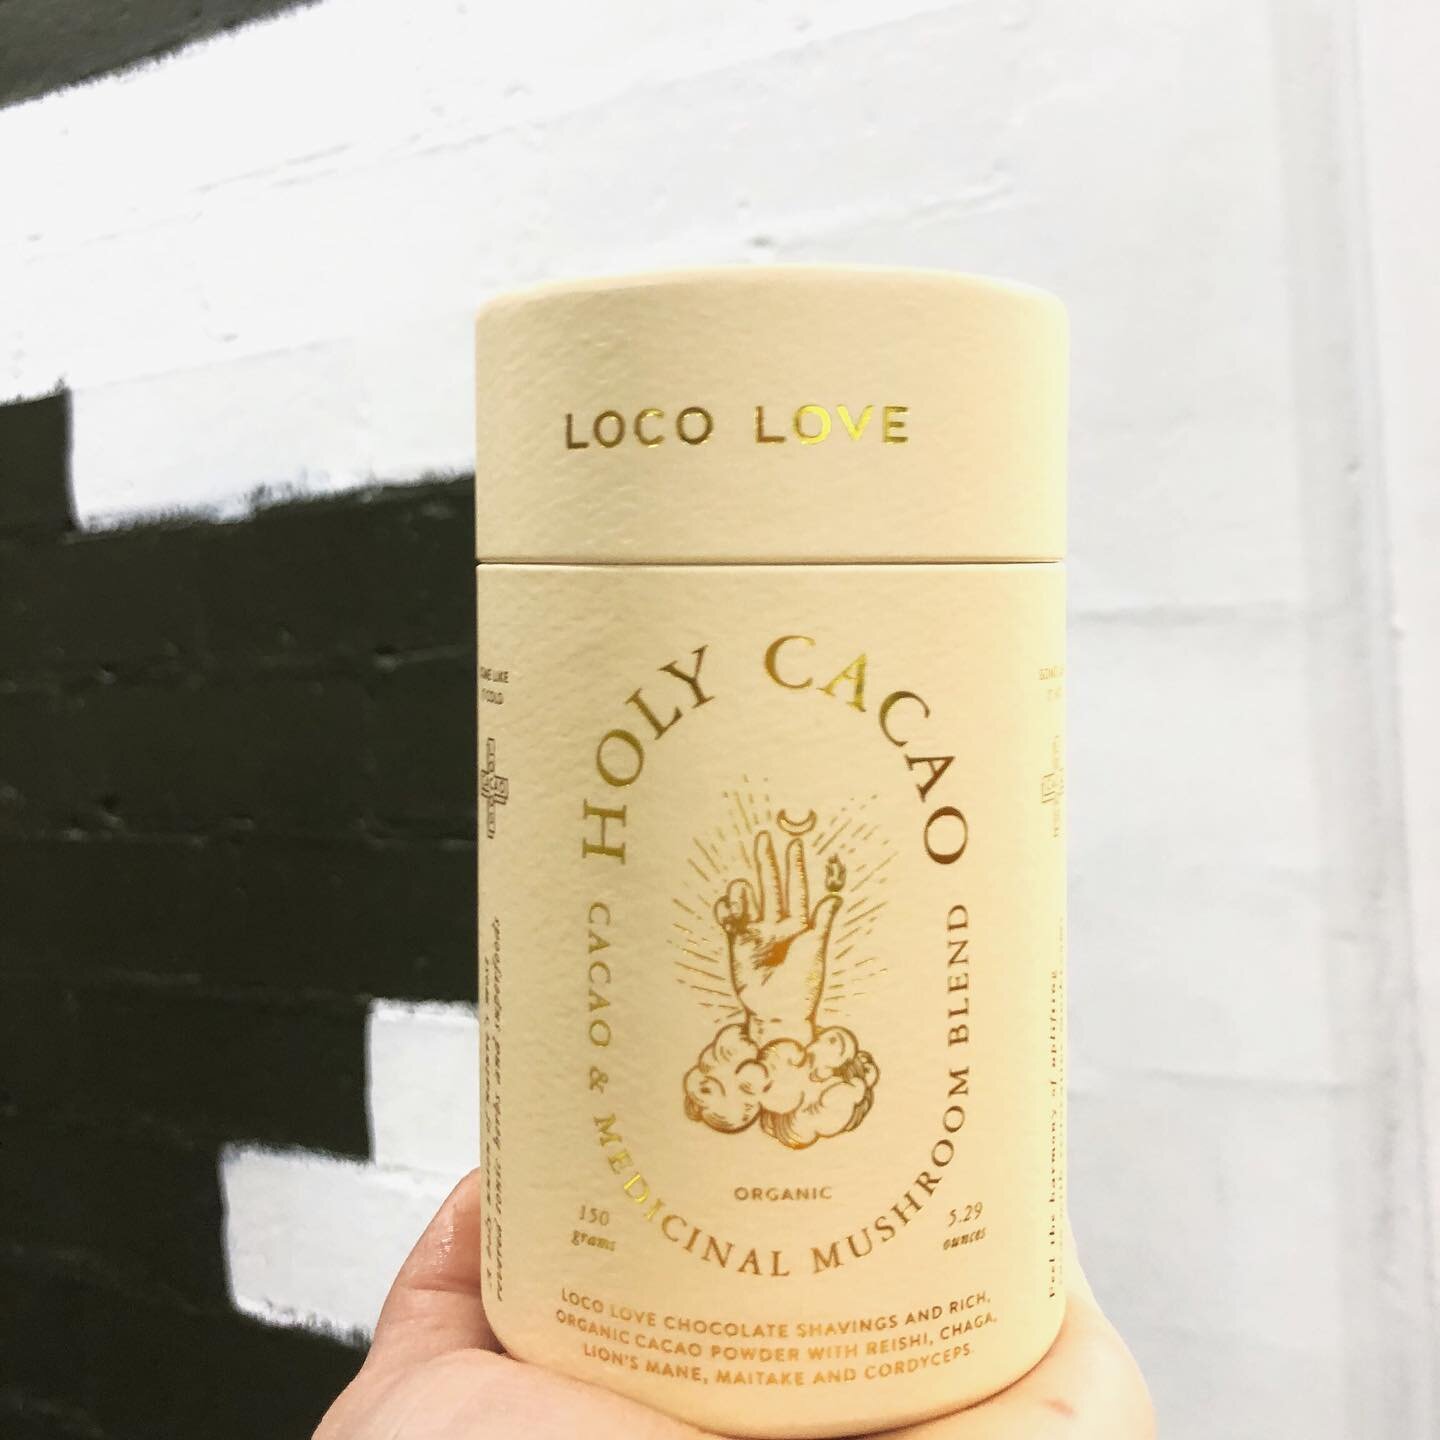 🍄 LOCO LOVE cocao &amp; medicinal mushroom blend...😍 
Their cocao powder is certified organic &amp; fair trade, it is grown on sustainable small farms in Peru. 

Add to your choice of warm milk &amp; feel the amazing potential benefits...
🍄Increas